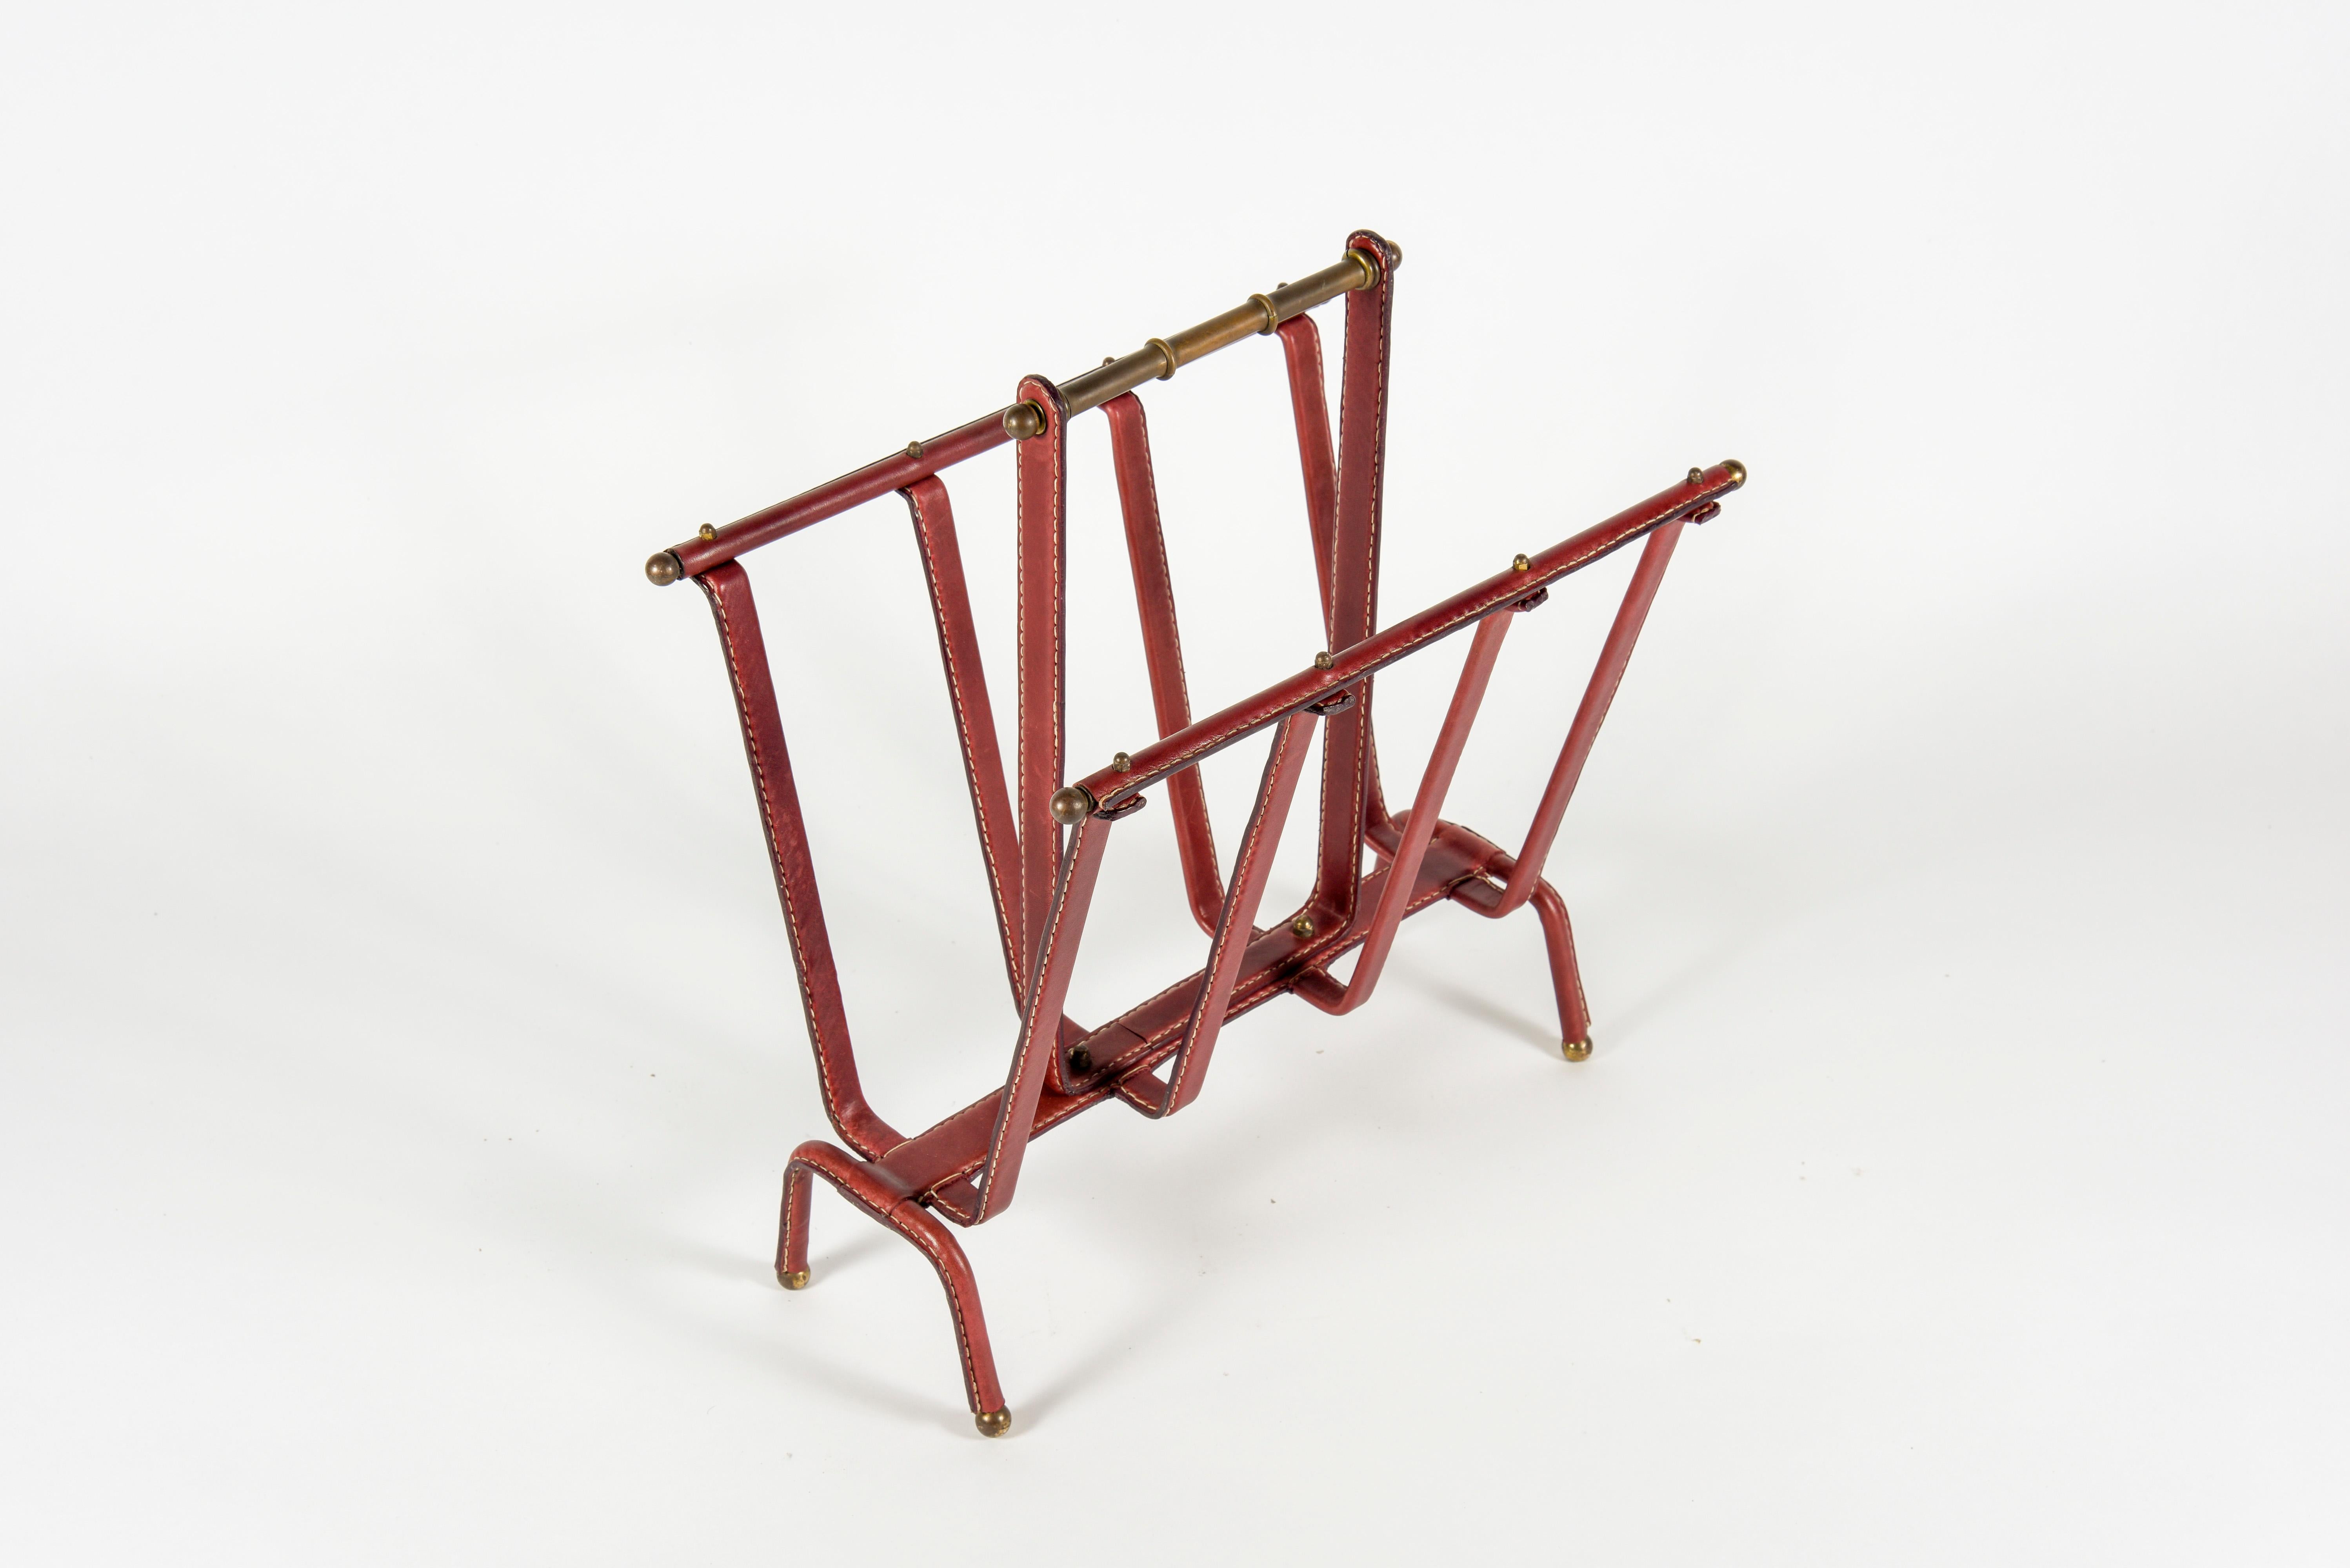 Very rare stitched leather magazine rack designed by Jacques Adnet
Very good condition
rare color
1950s
France.